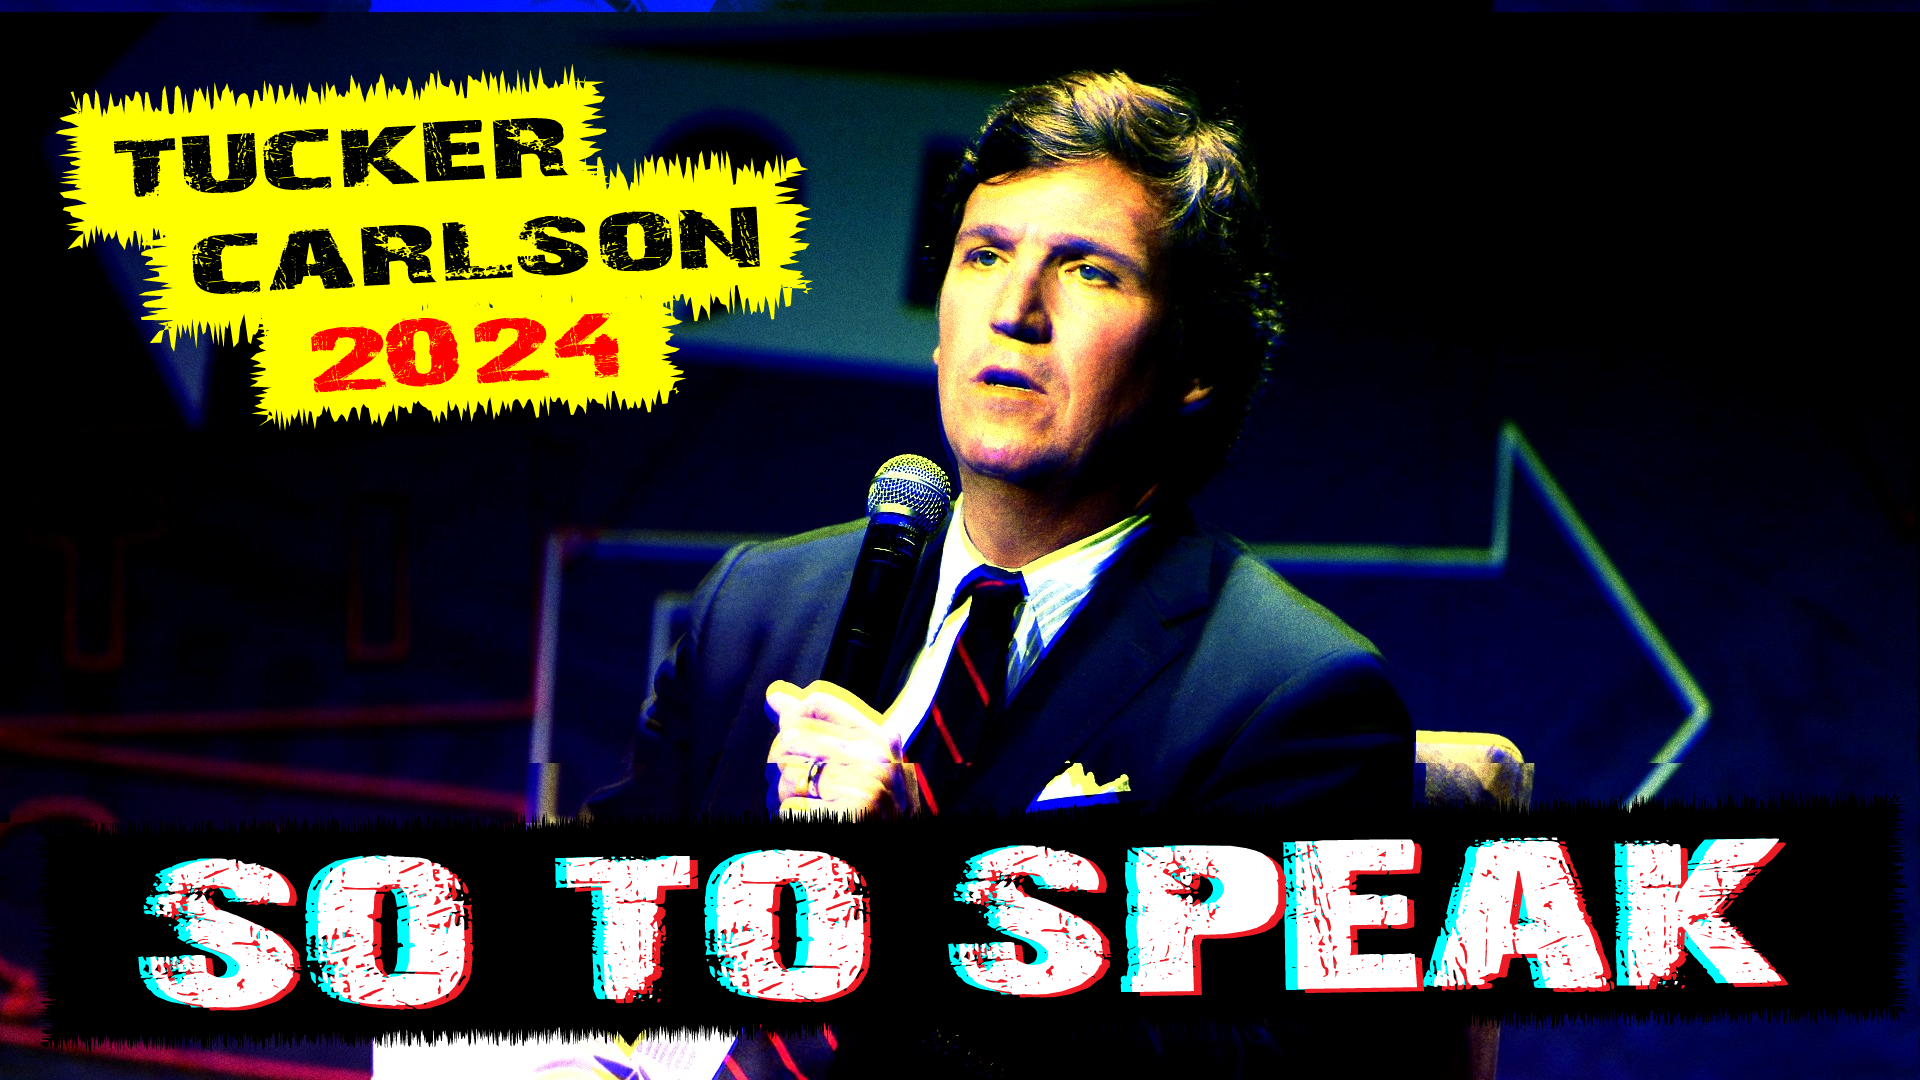 Tucker Carlson might become president and Media Matters is terrified, as is the New York Times